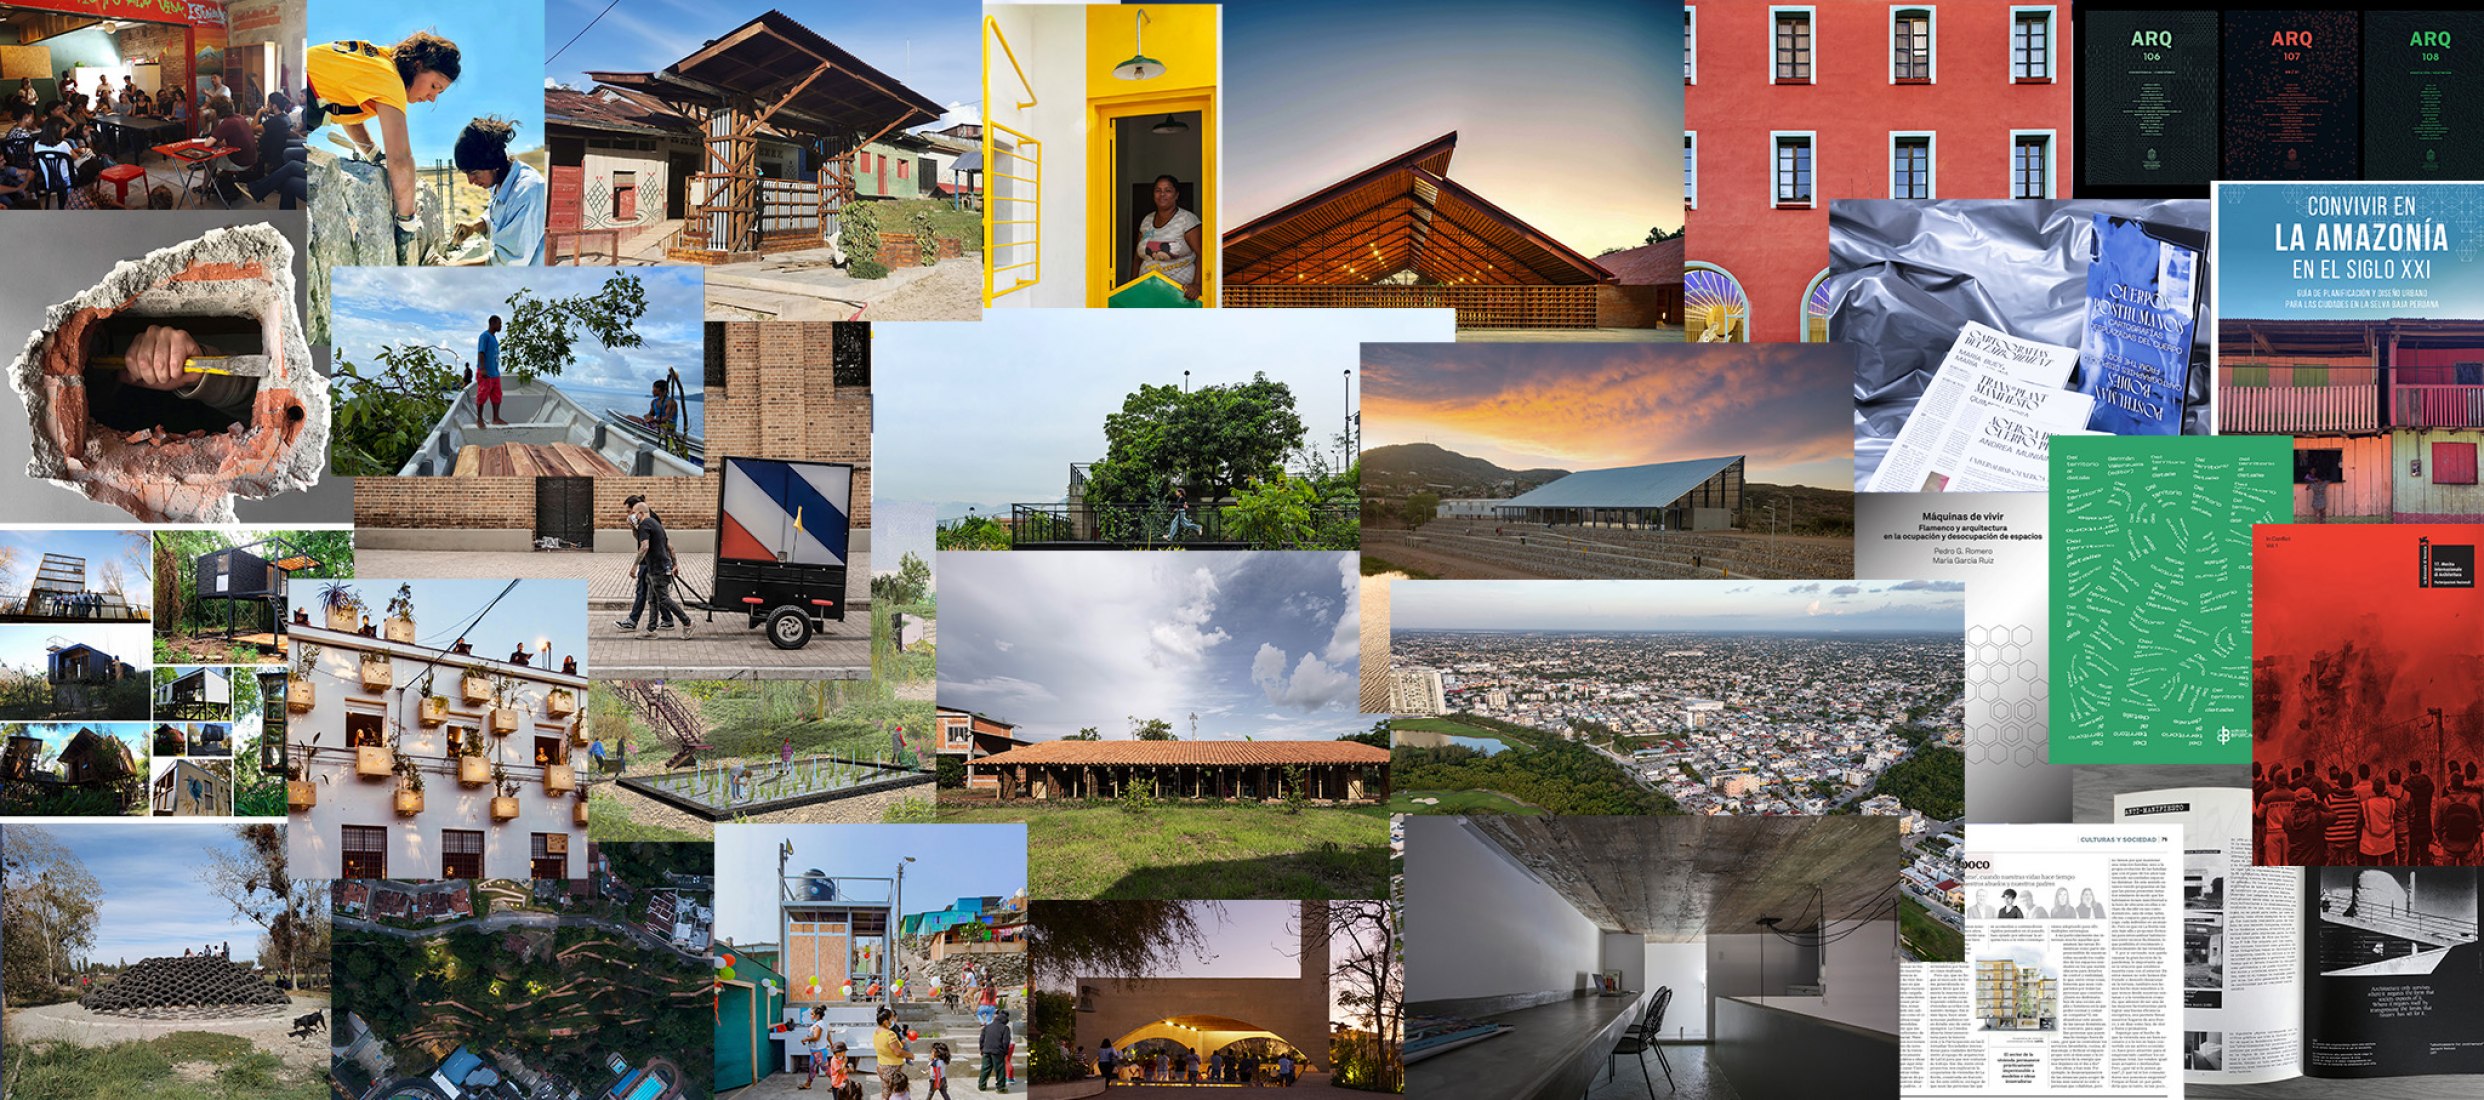 Winners of the 12th Ibero-American Biennial of Architecture and Urbanism